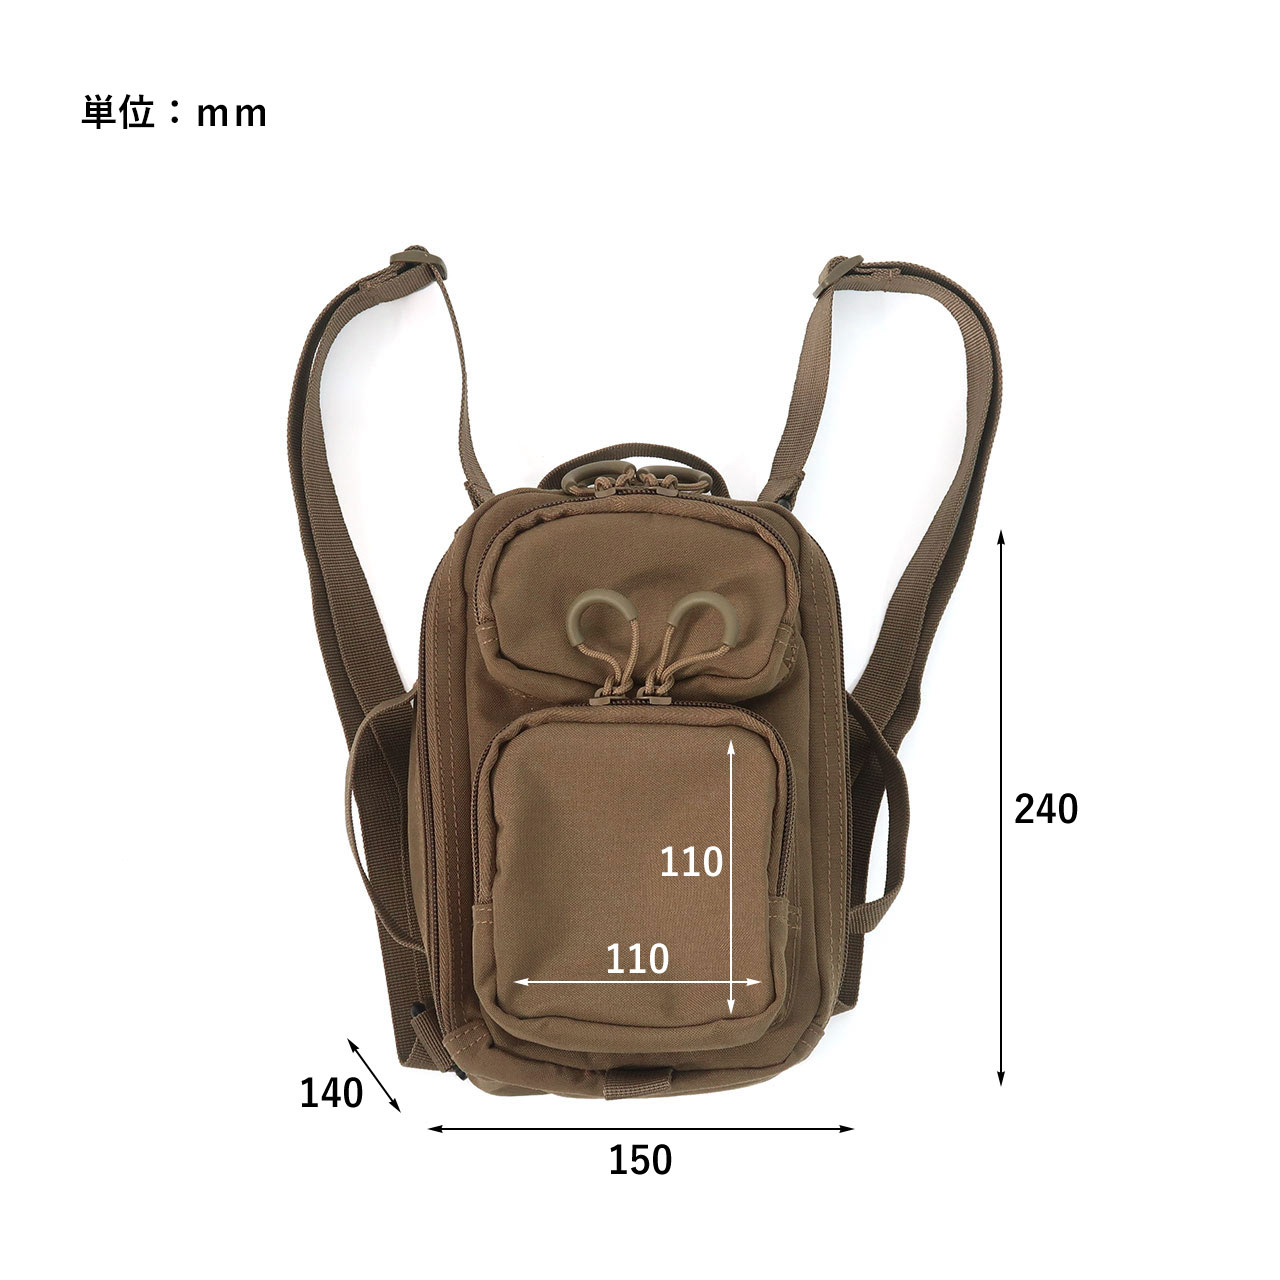 4WAY BACKPACK POUCH / 4ウェイバックパックポーチ - WOLF BROWN ...